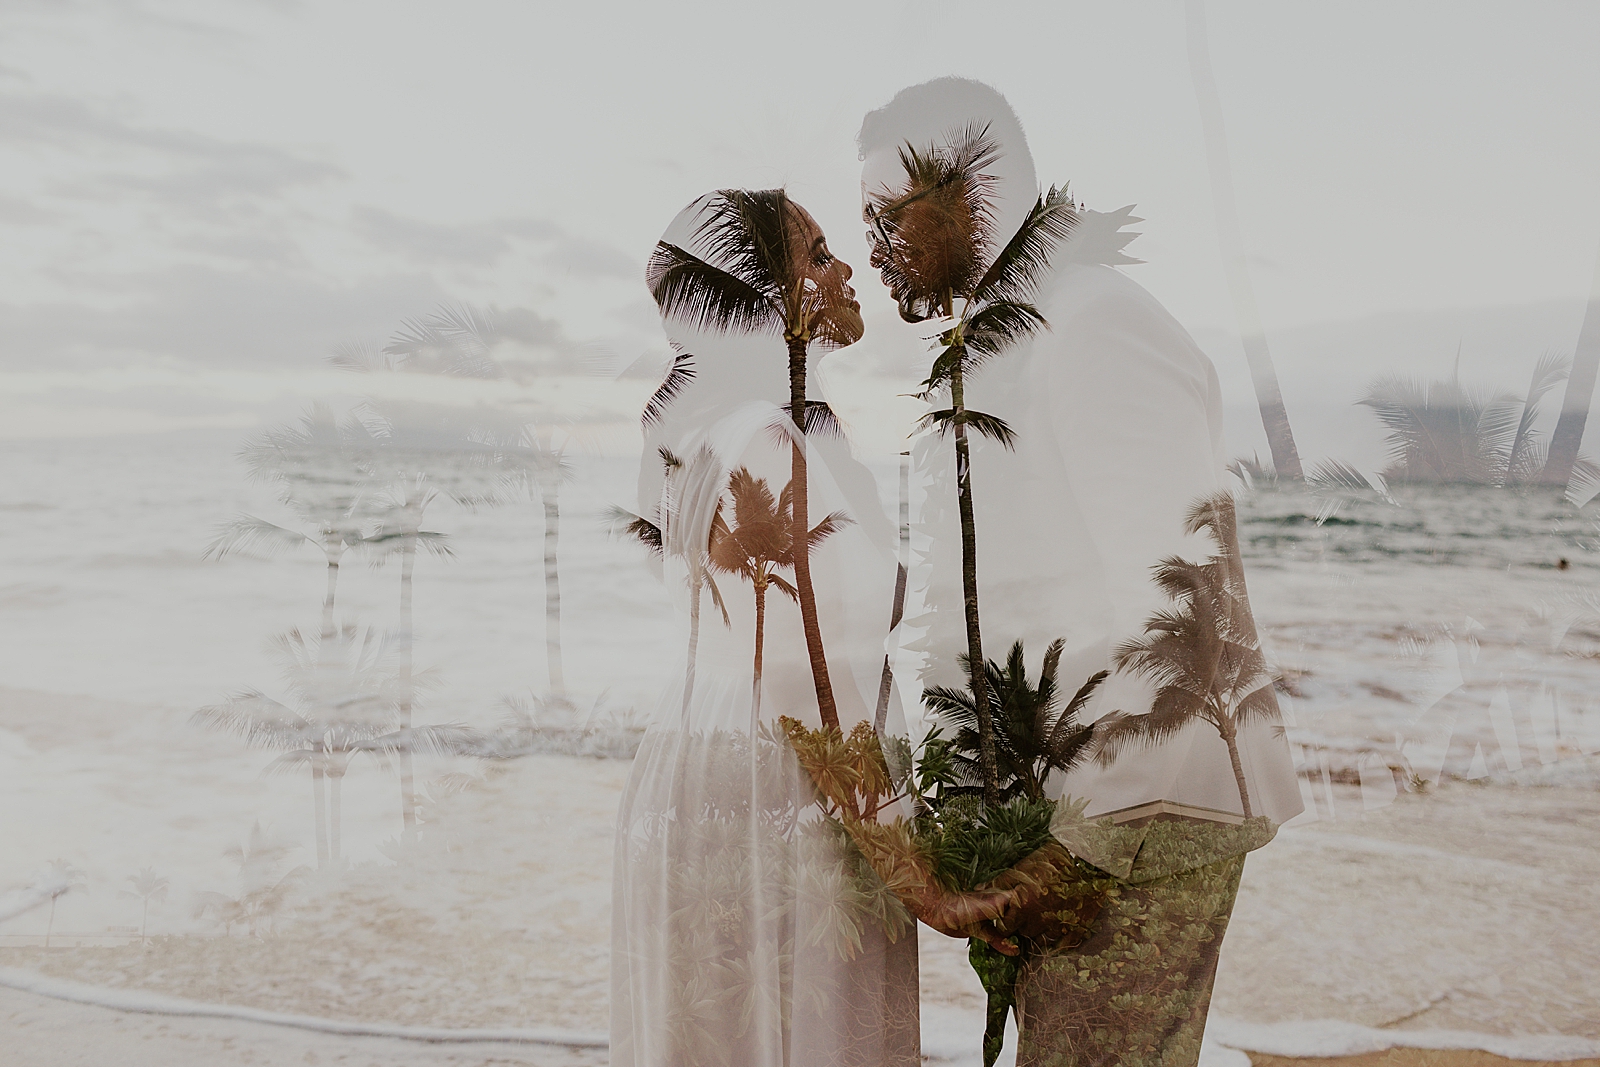 Bride and Groom holding hands and leaning in for a kiss overlayed on picture of palm trees